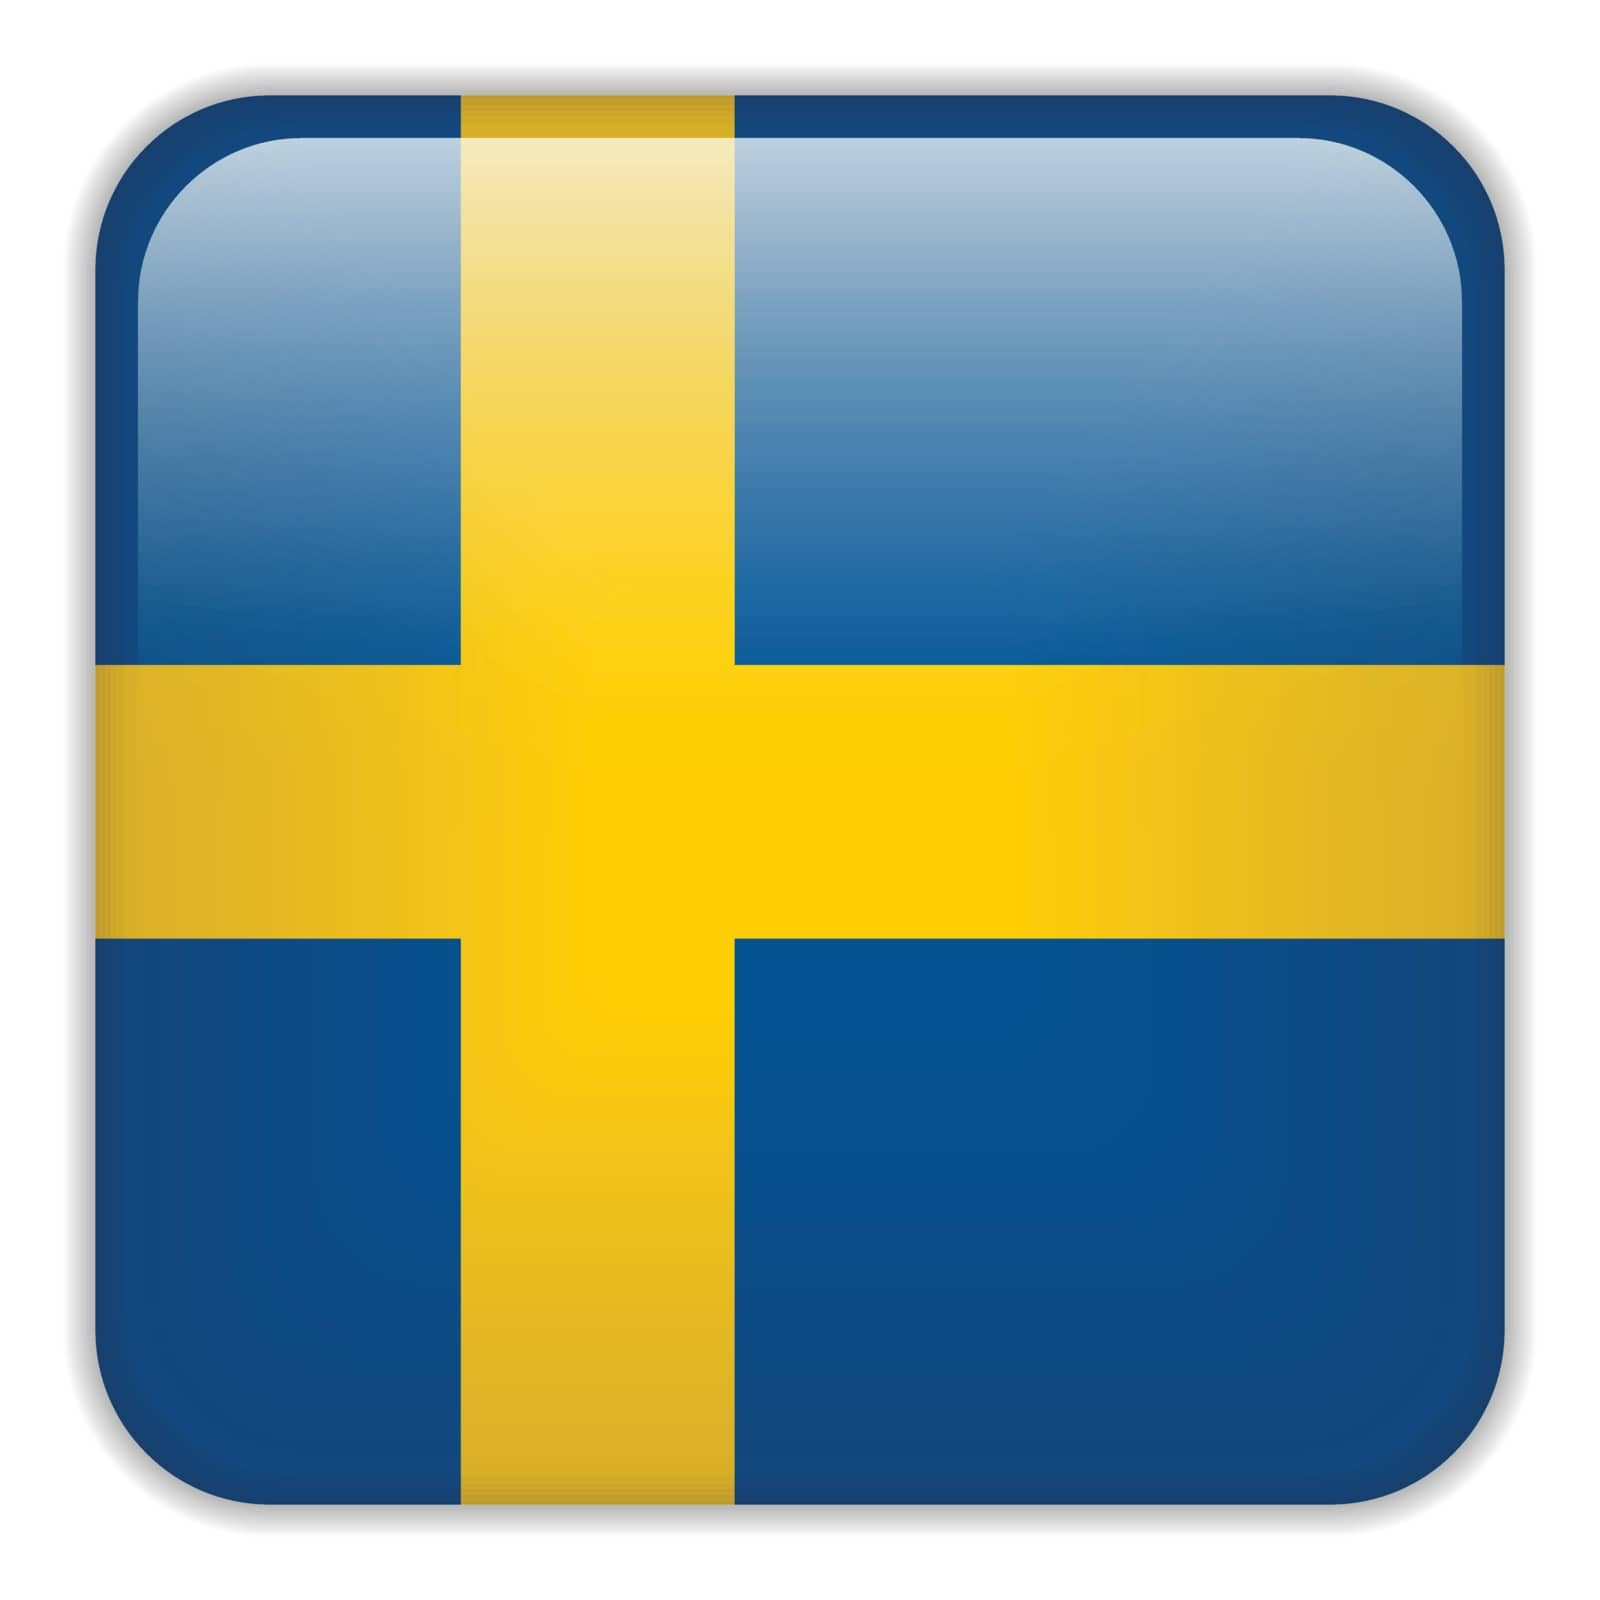 Vector - Sweden Flag Smartphone Application Square Buttons